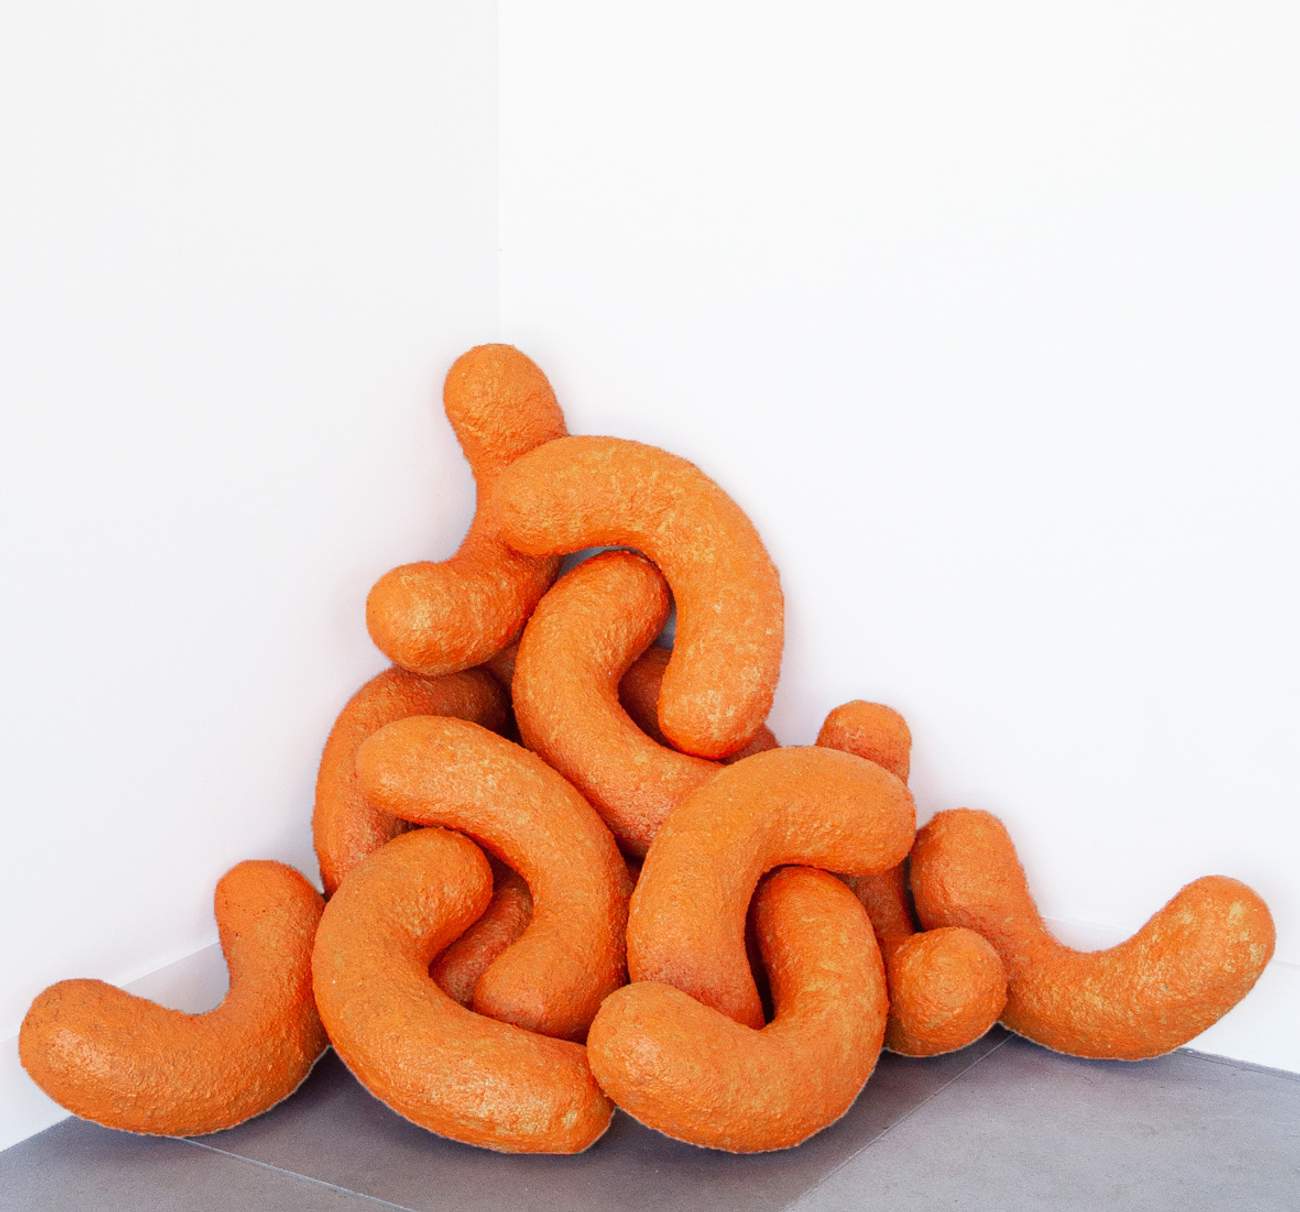 Preview image for Giant Cheetos (pile)